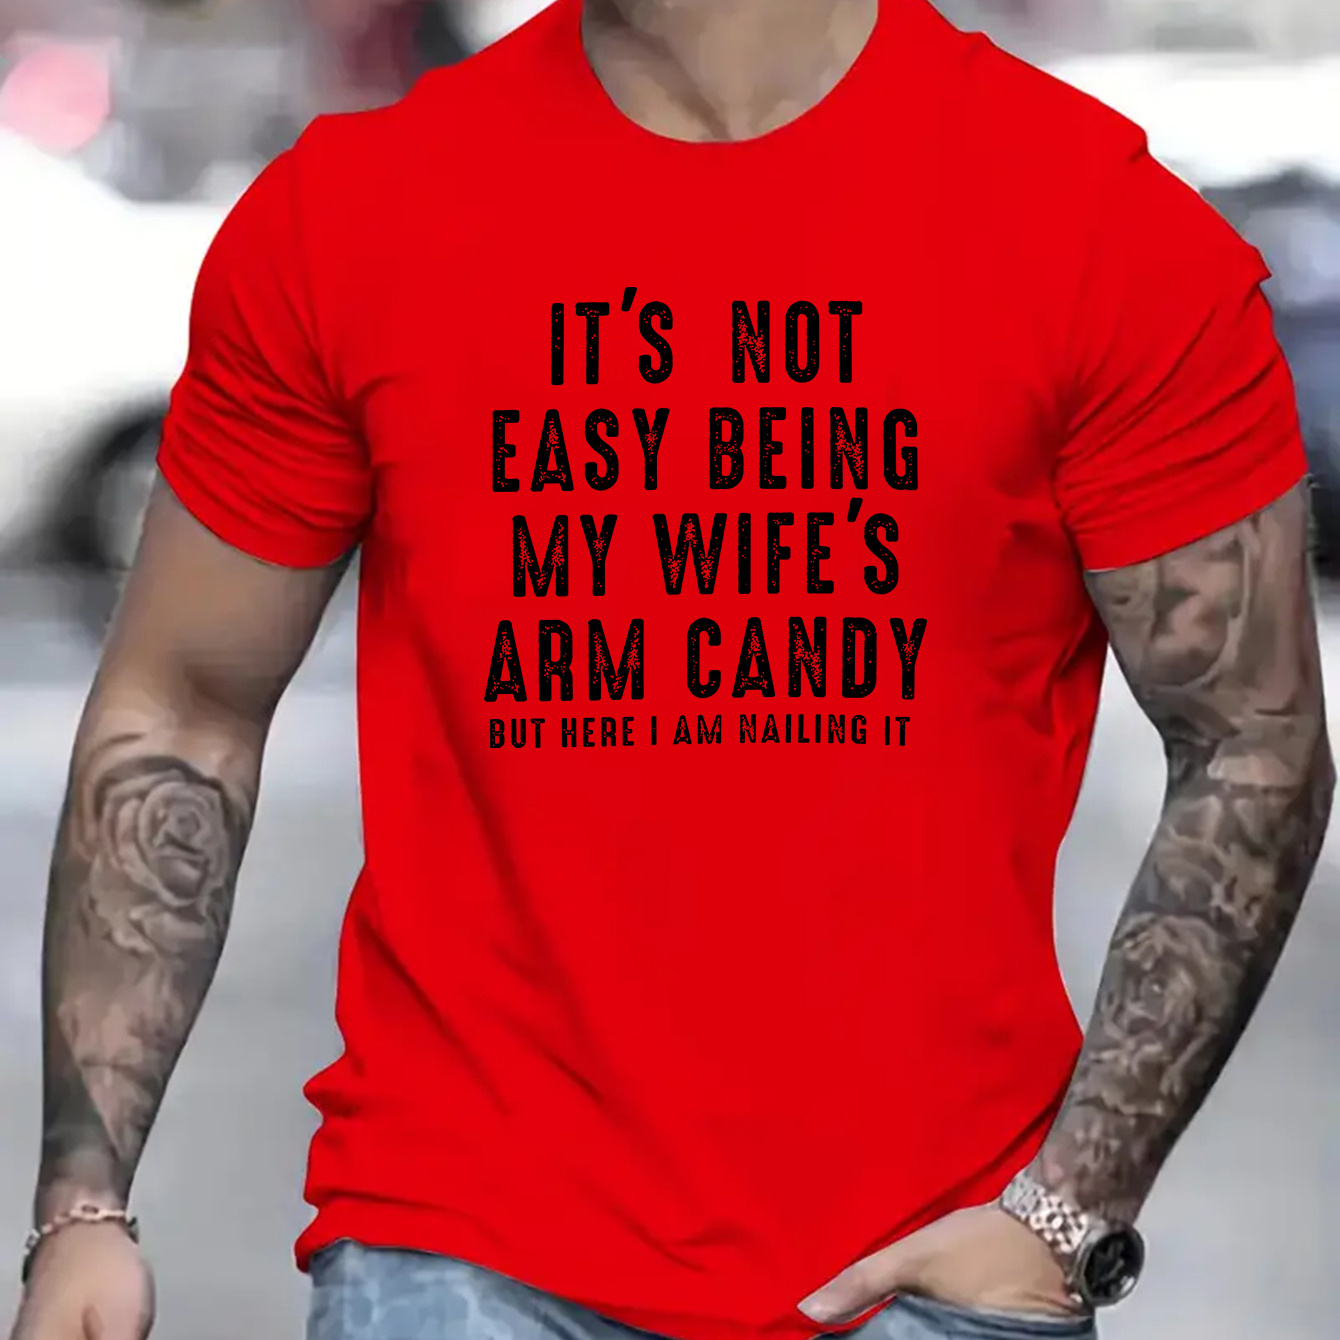 

It's Not Easy Being My Wife's Arm Candy Letter Print Men's Short Sleeve Crew Neck T-shirts, Comfy Breathable Casual Elastic Tops, Men's Clothing